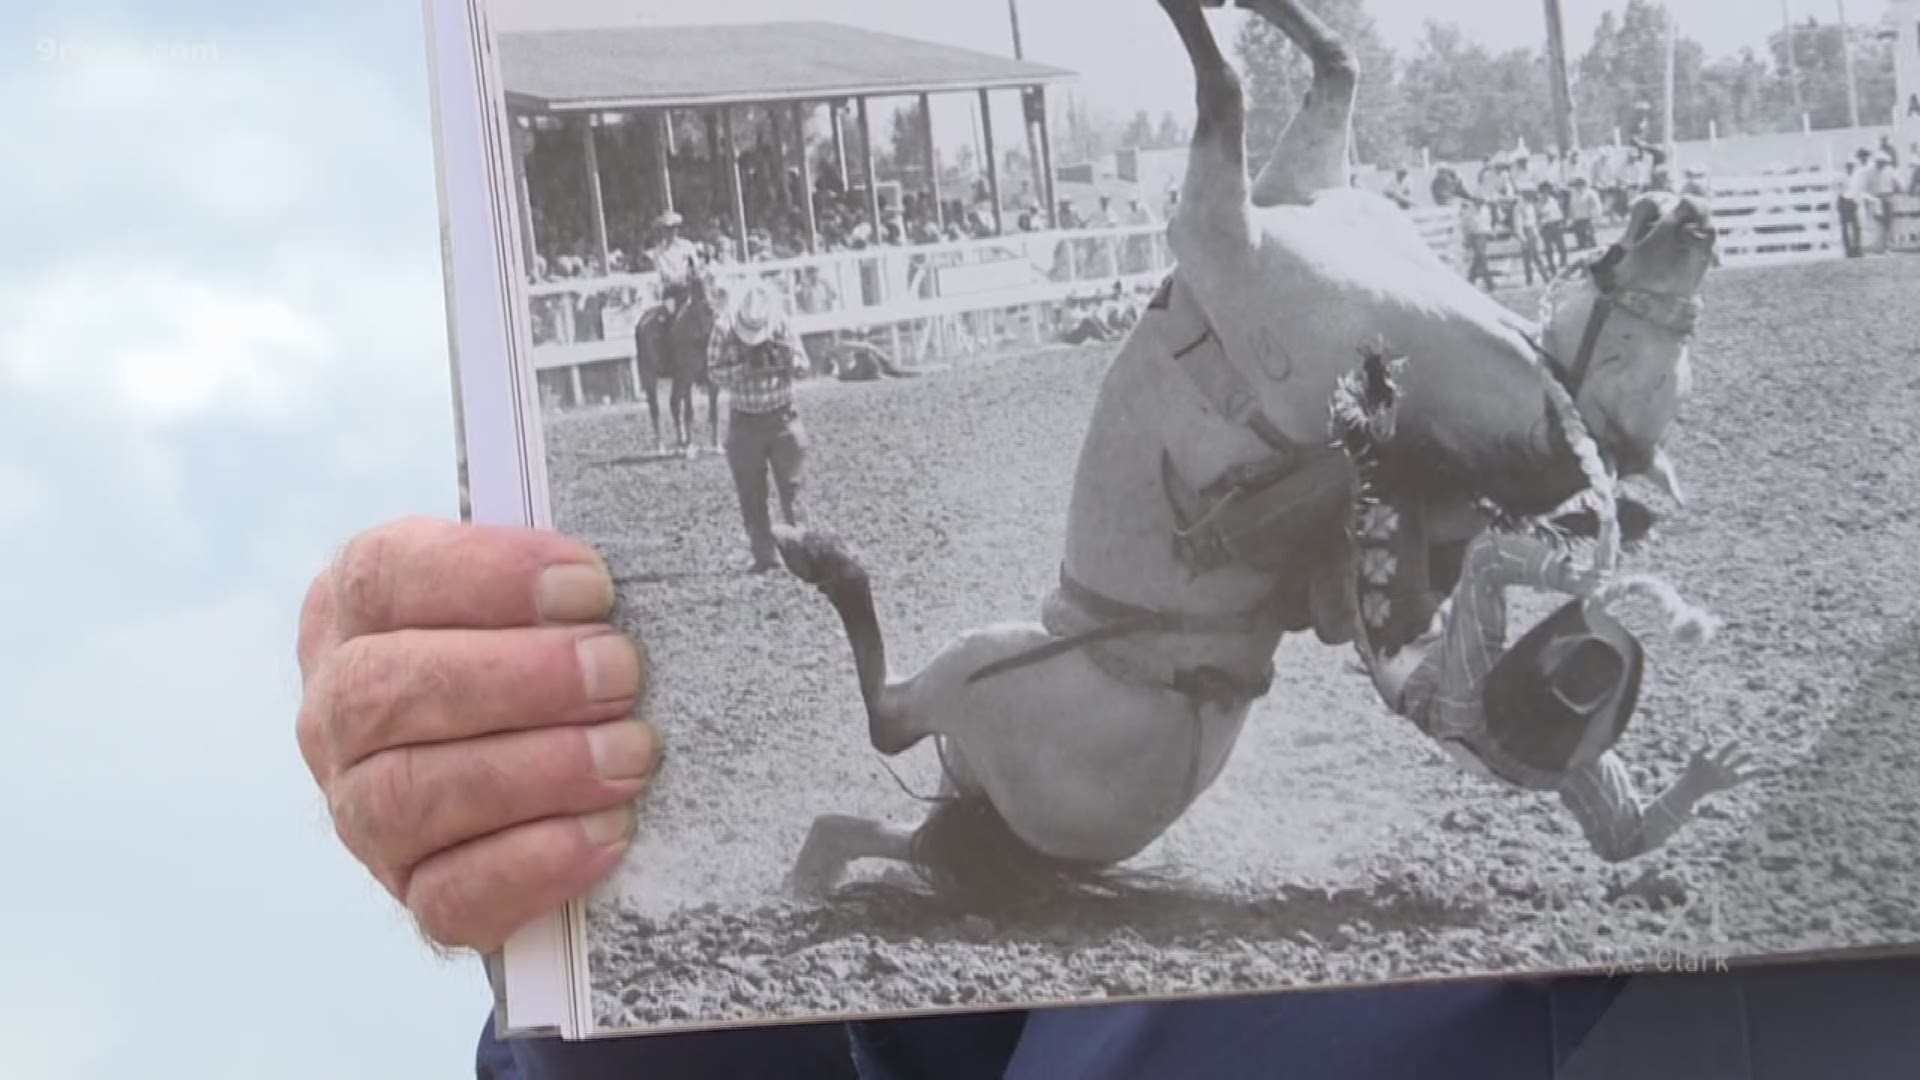 In 1962, Jerry Gustafson picked up his first camera. He started shooting school pictures and worked for the local newspaper. 57 years later, The Bull Riding Hall of Fame inducted him into the Class of 2019 as a "legend."